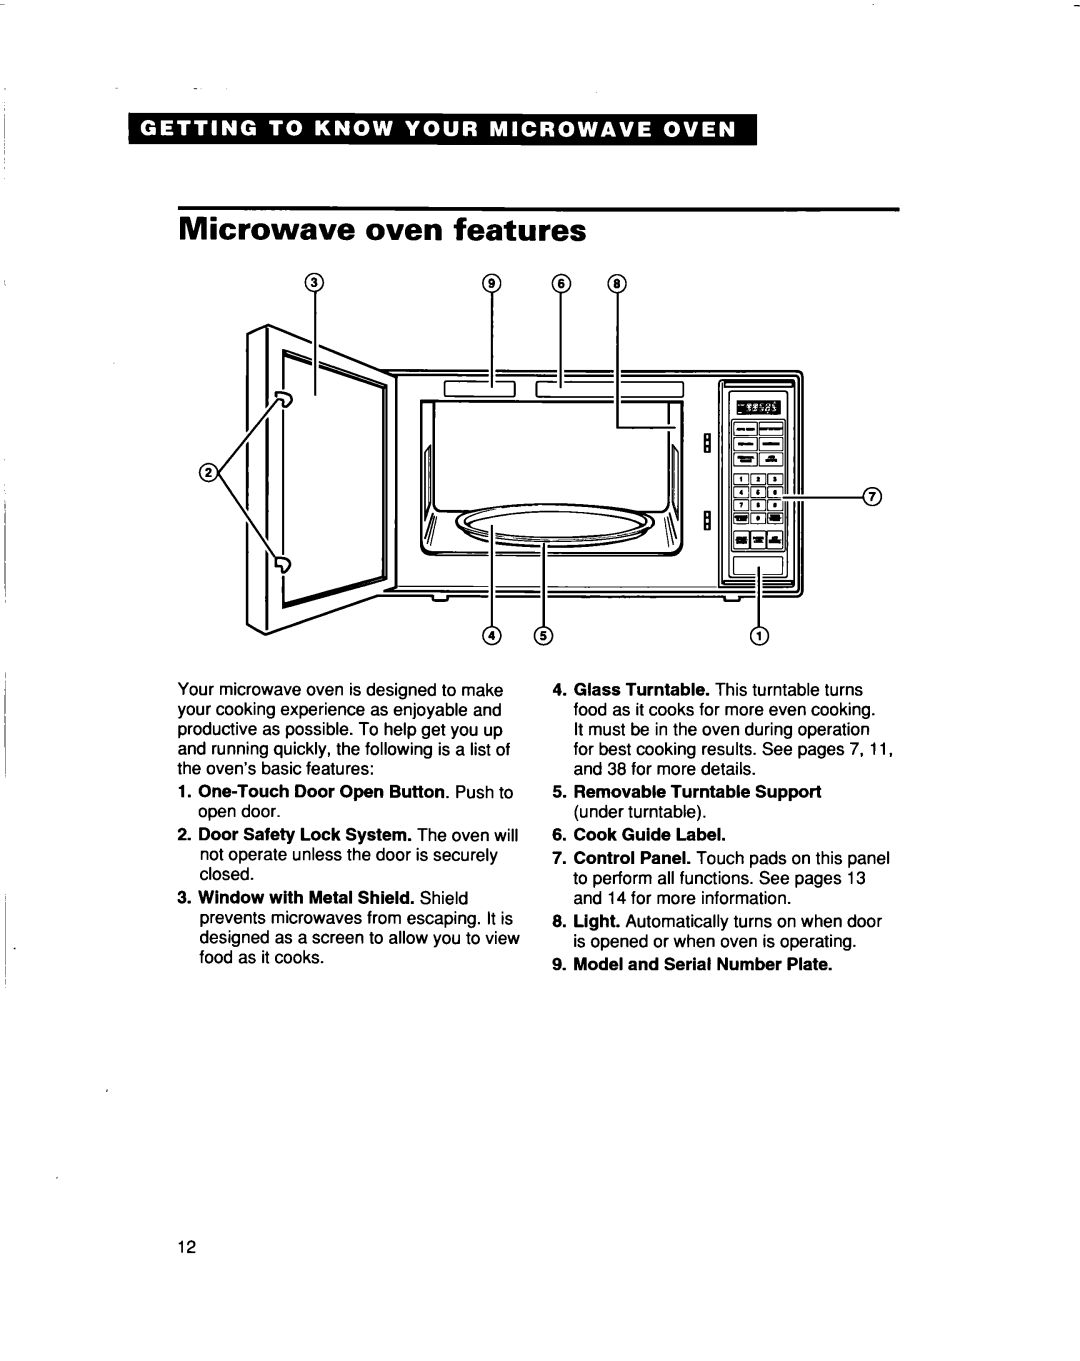 Whirlpool MT5120XAQ Microwave oven features, Removable Turntable Support, Cook Guide Label, Model and Serial Number Plate 